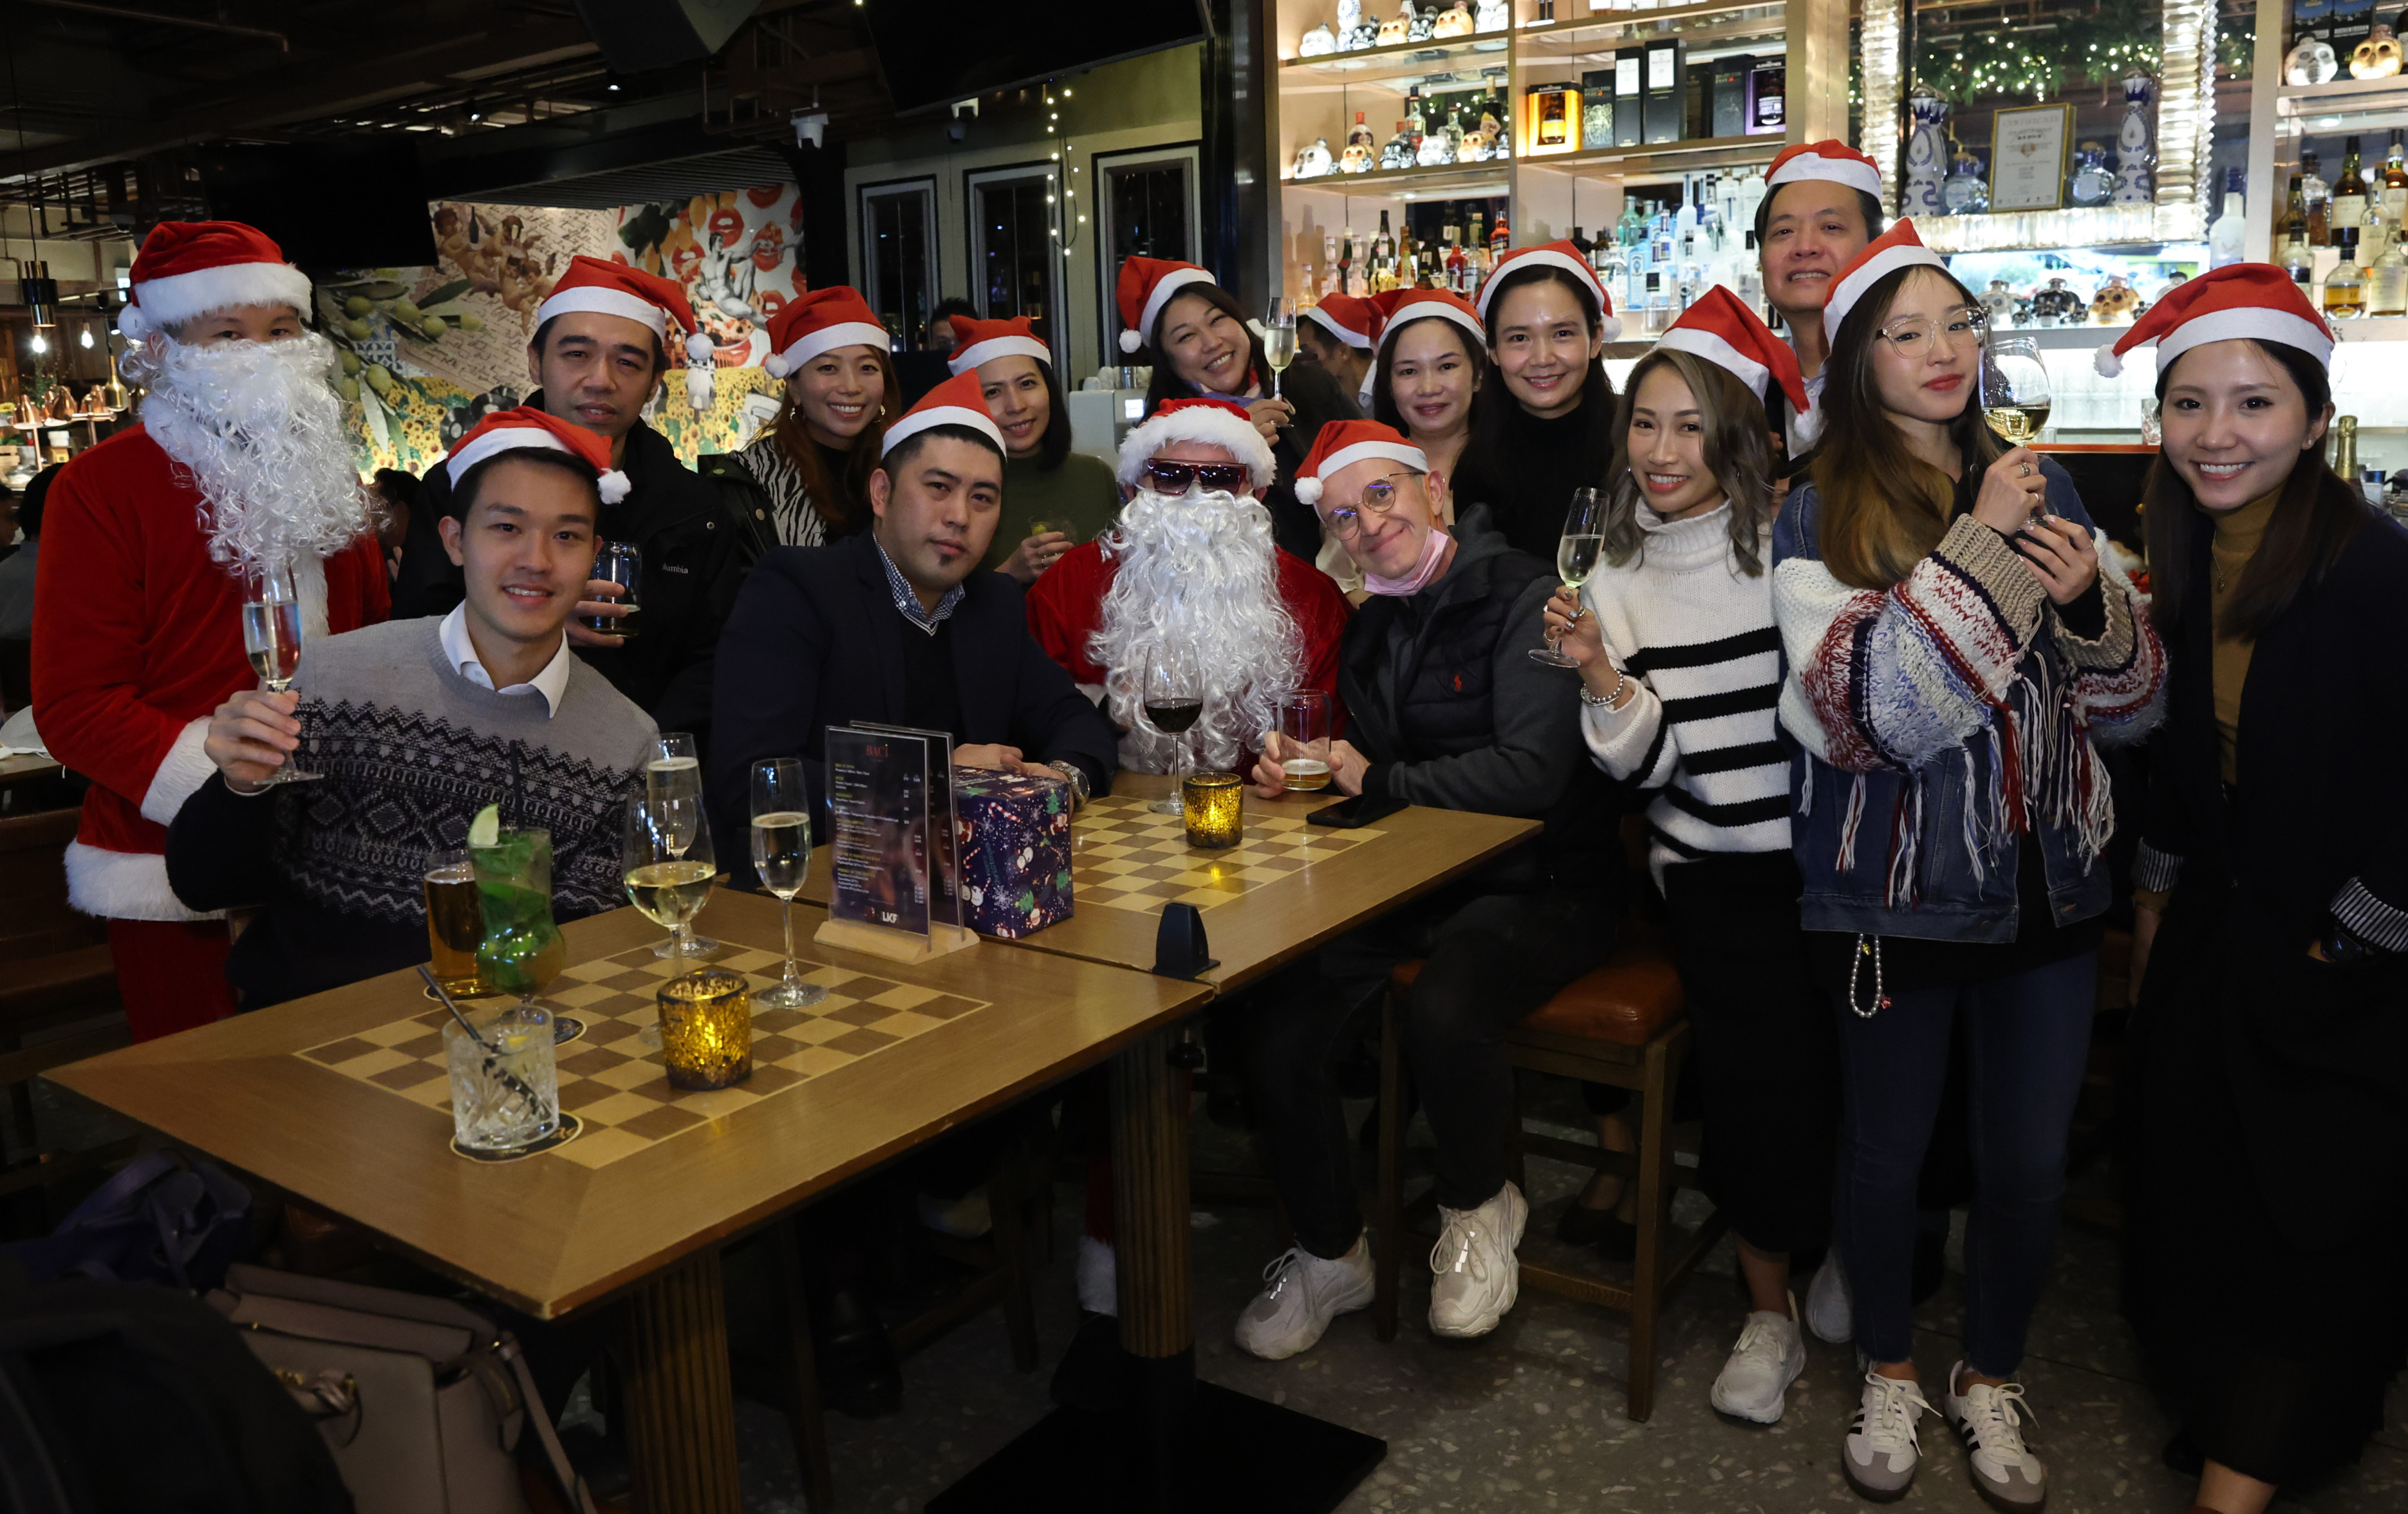 The Santa Con charity event at the BACI Trattoria & Bar of the Lan Kwai Fong Group. Photo: Edmond So